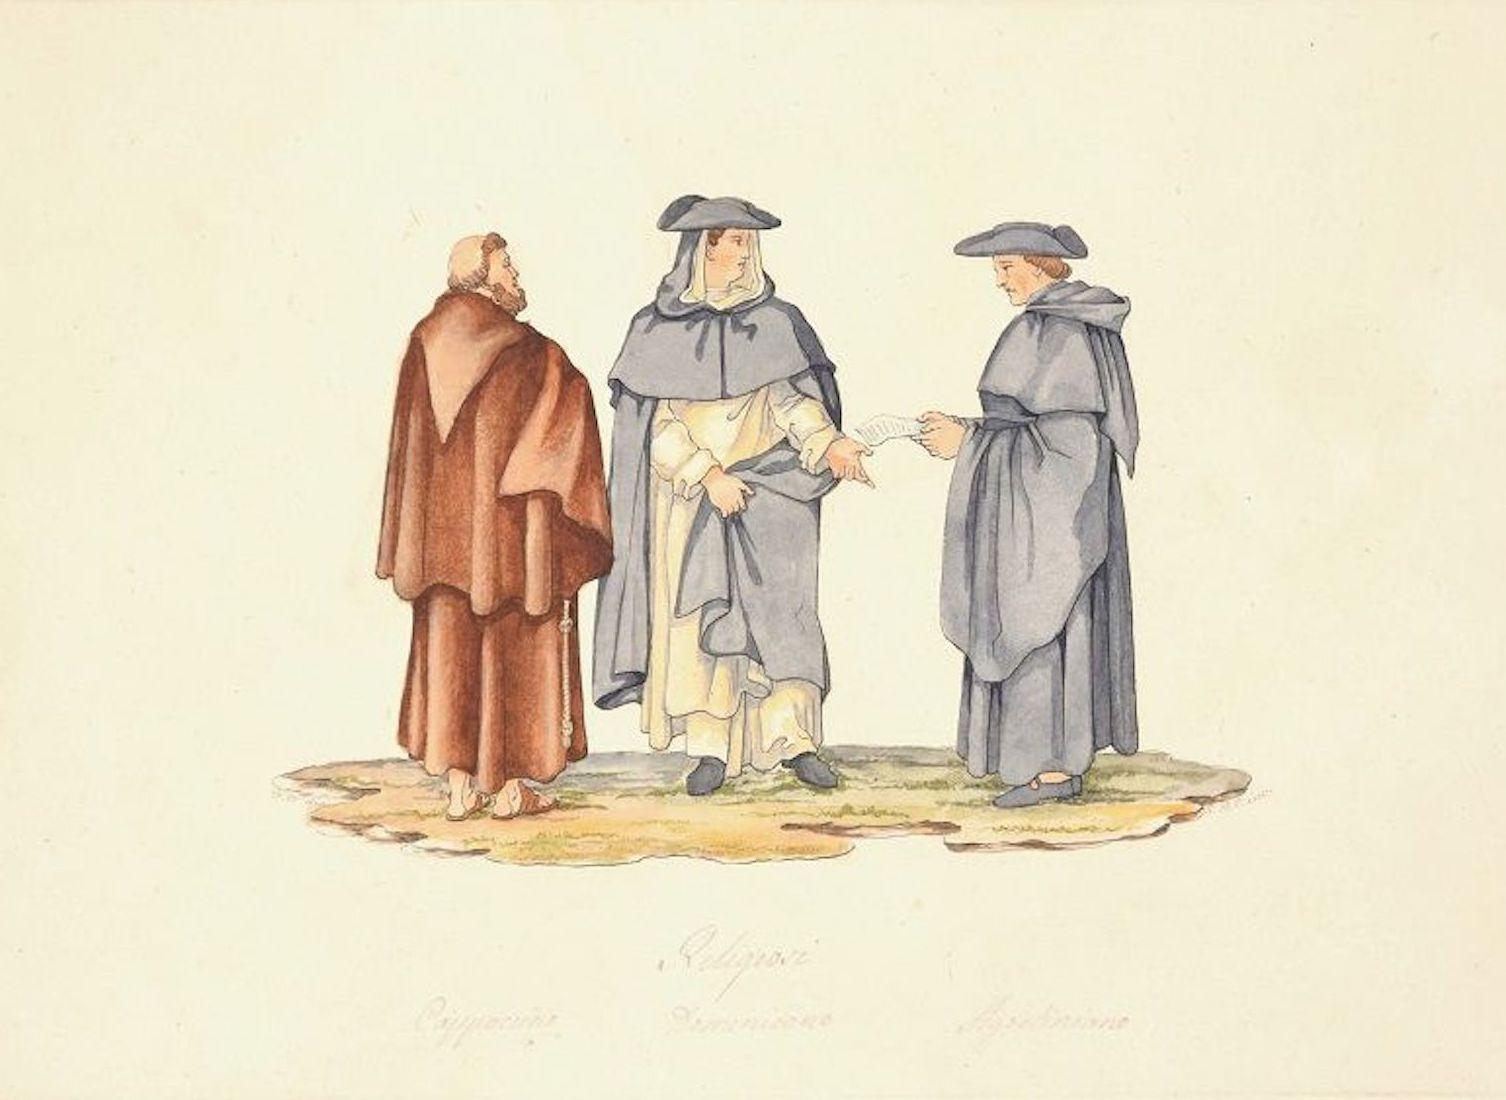 Religious Men - Colored Etching After F. Ferrari by G.B. Cipriani